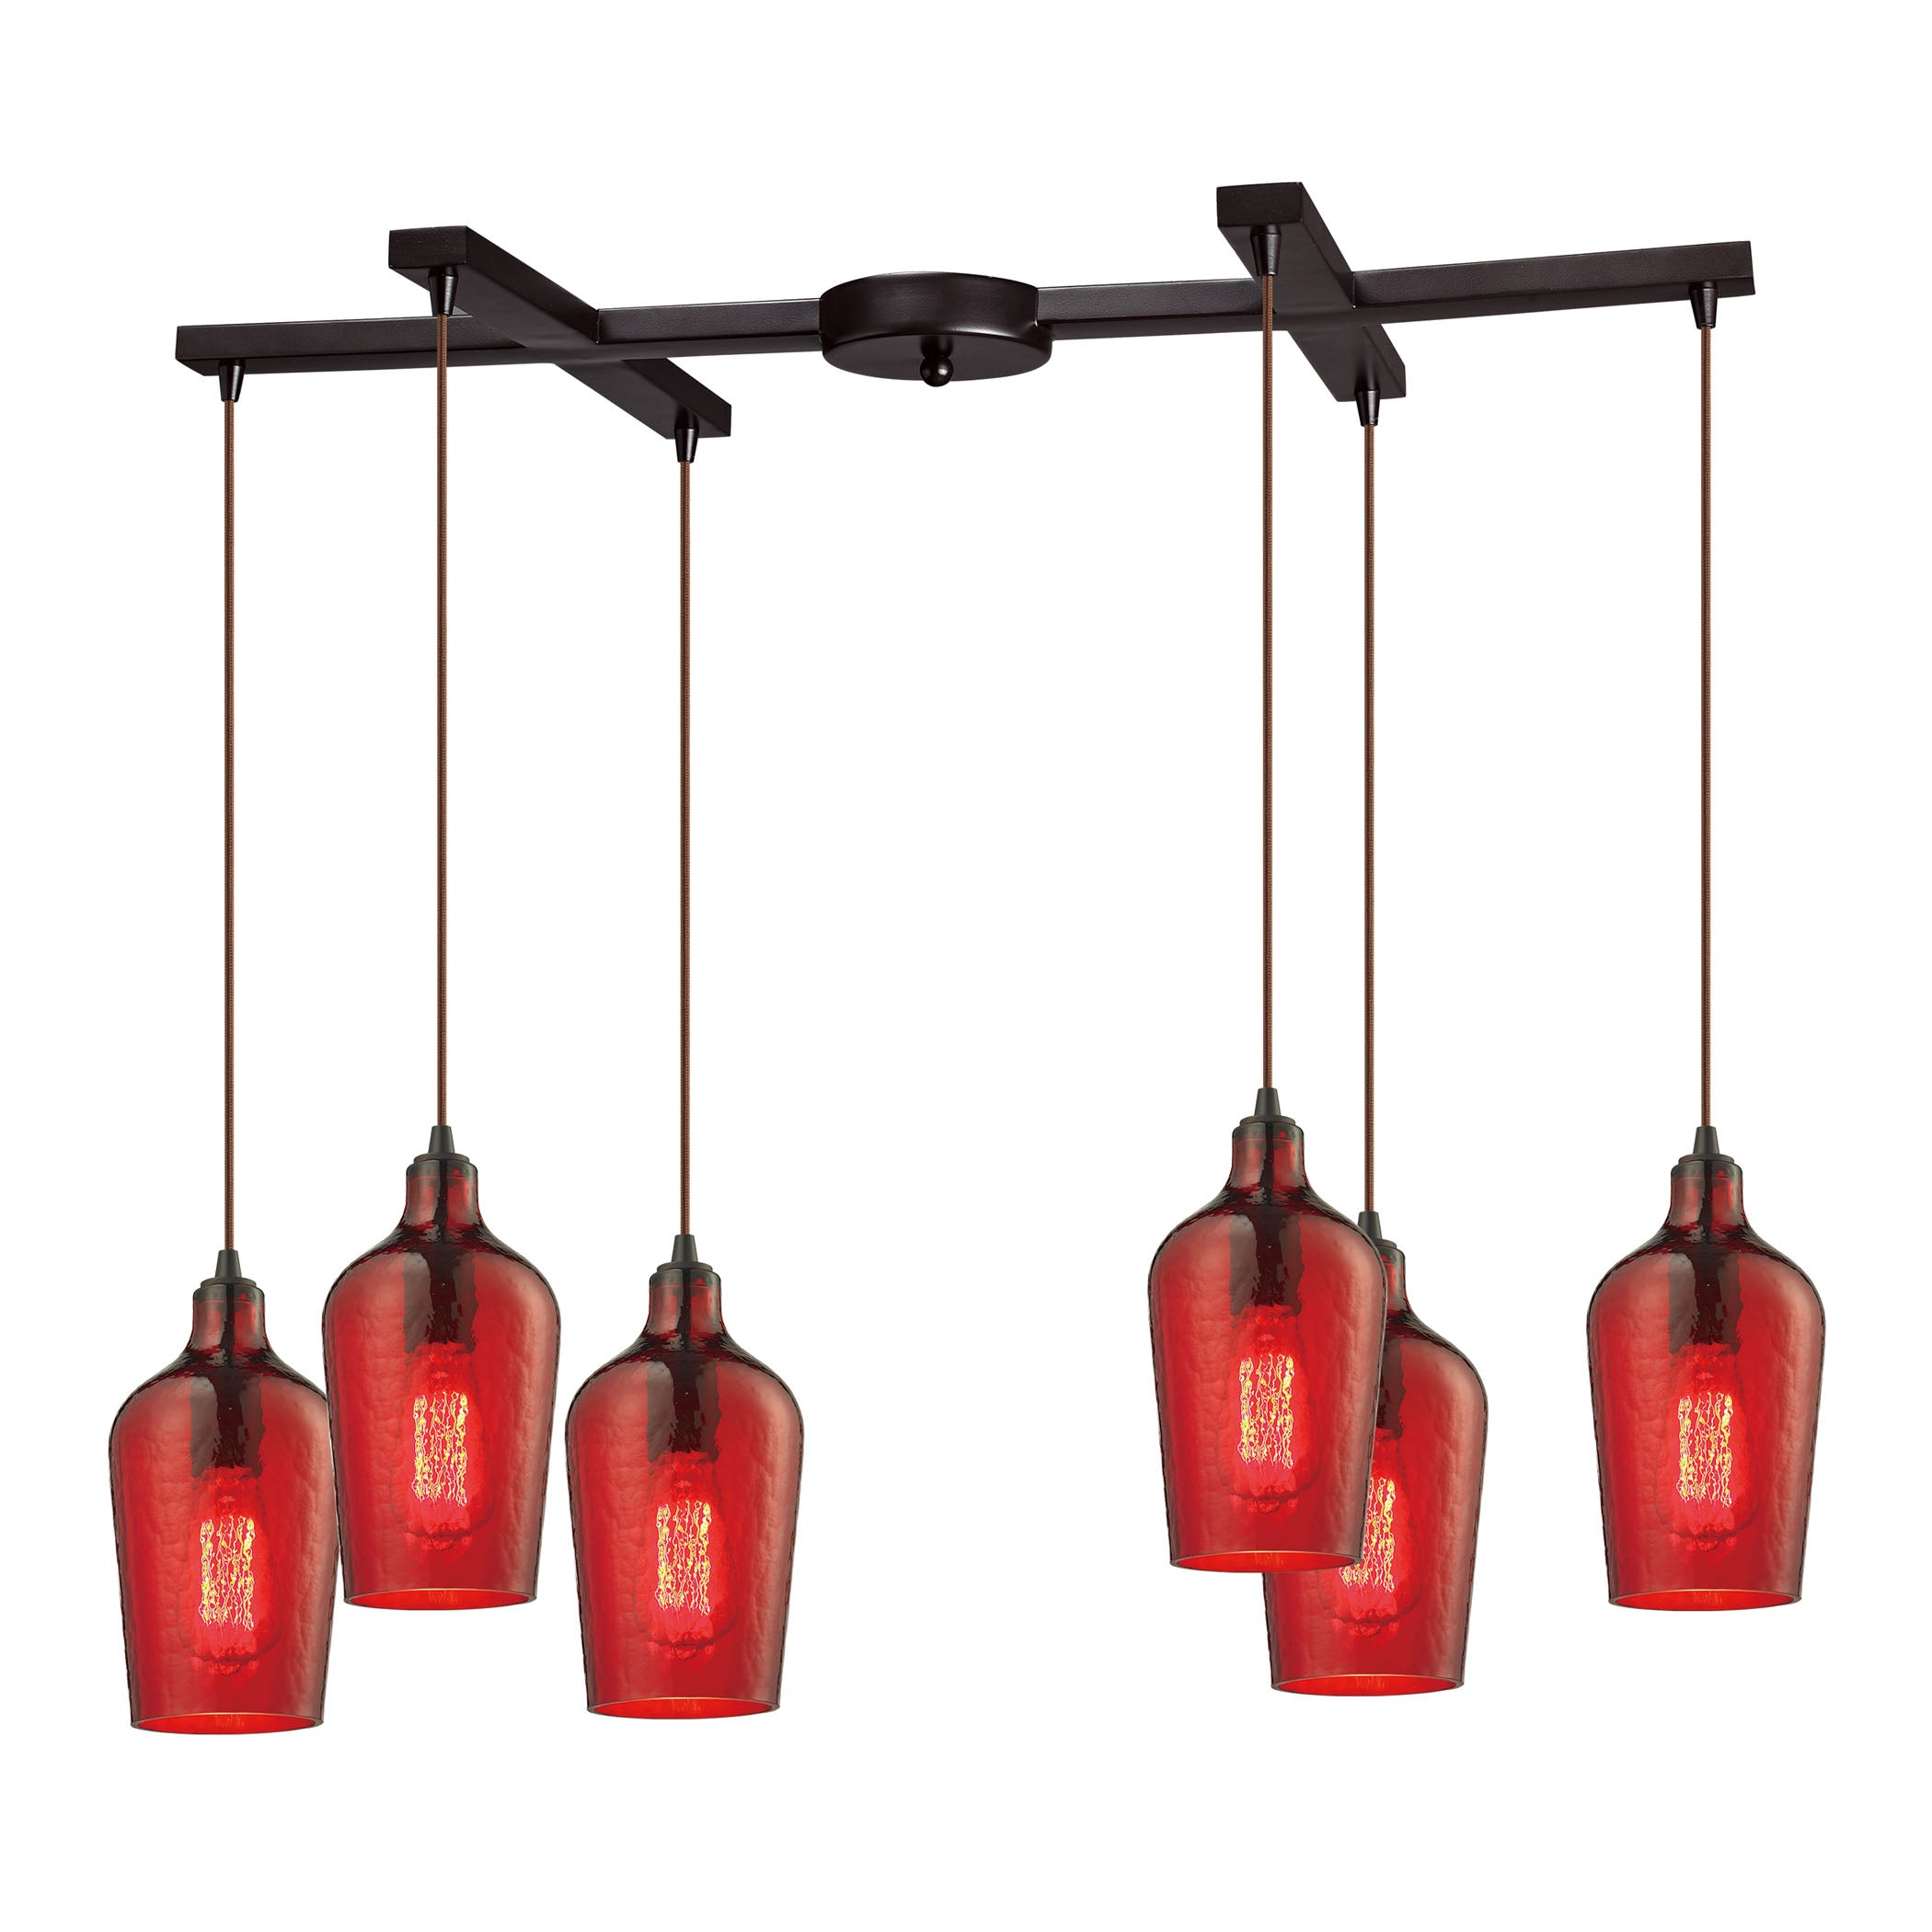 ELK Lighting 10331/6HRD Hammered Glass 6-Light H-Bar Pendant Fixture in Oiled Bronze with Hammered Red Glass